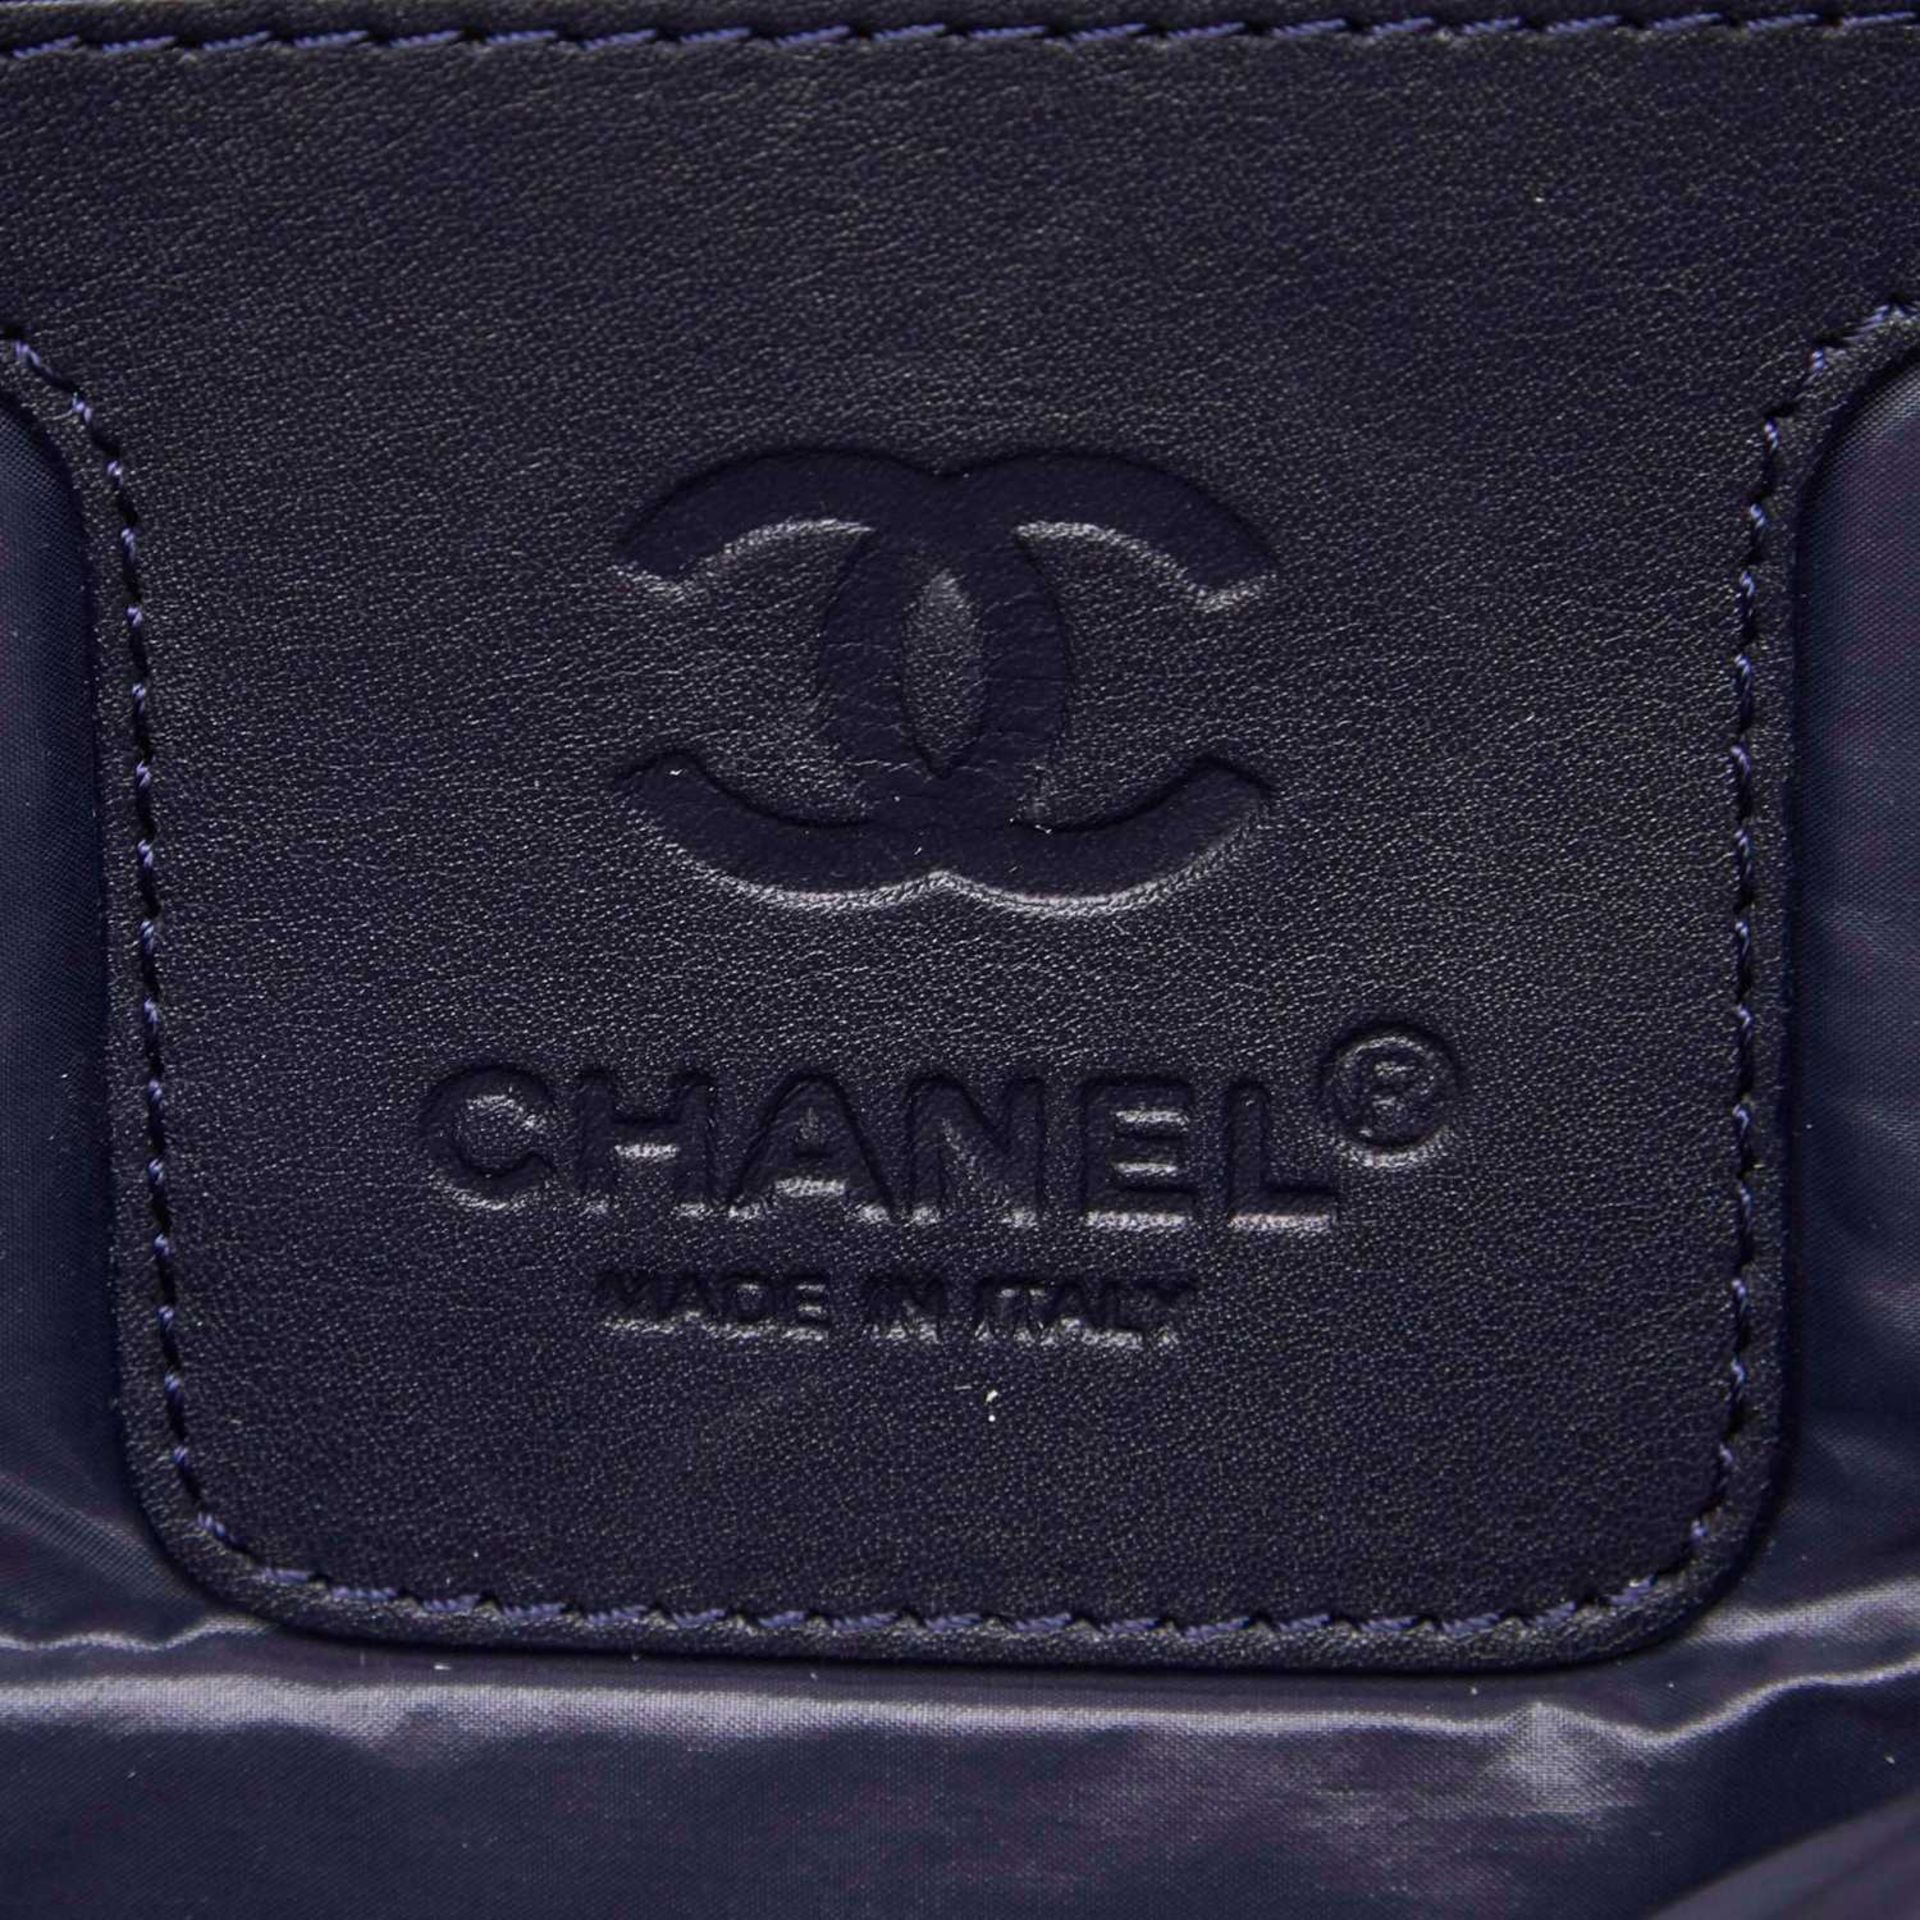 A Chanel Cocoon messenger bag, - Image 5 of 13